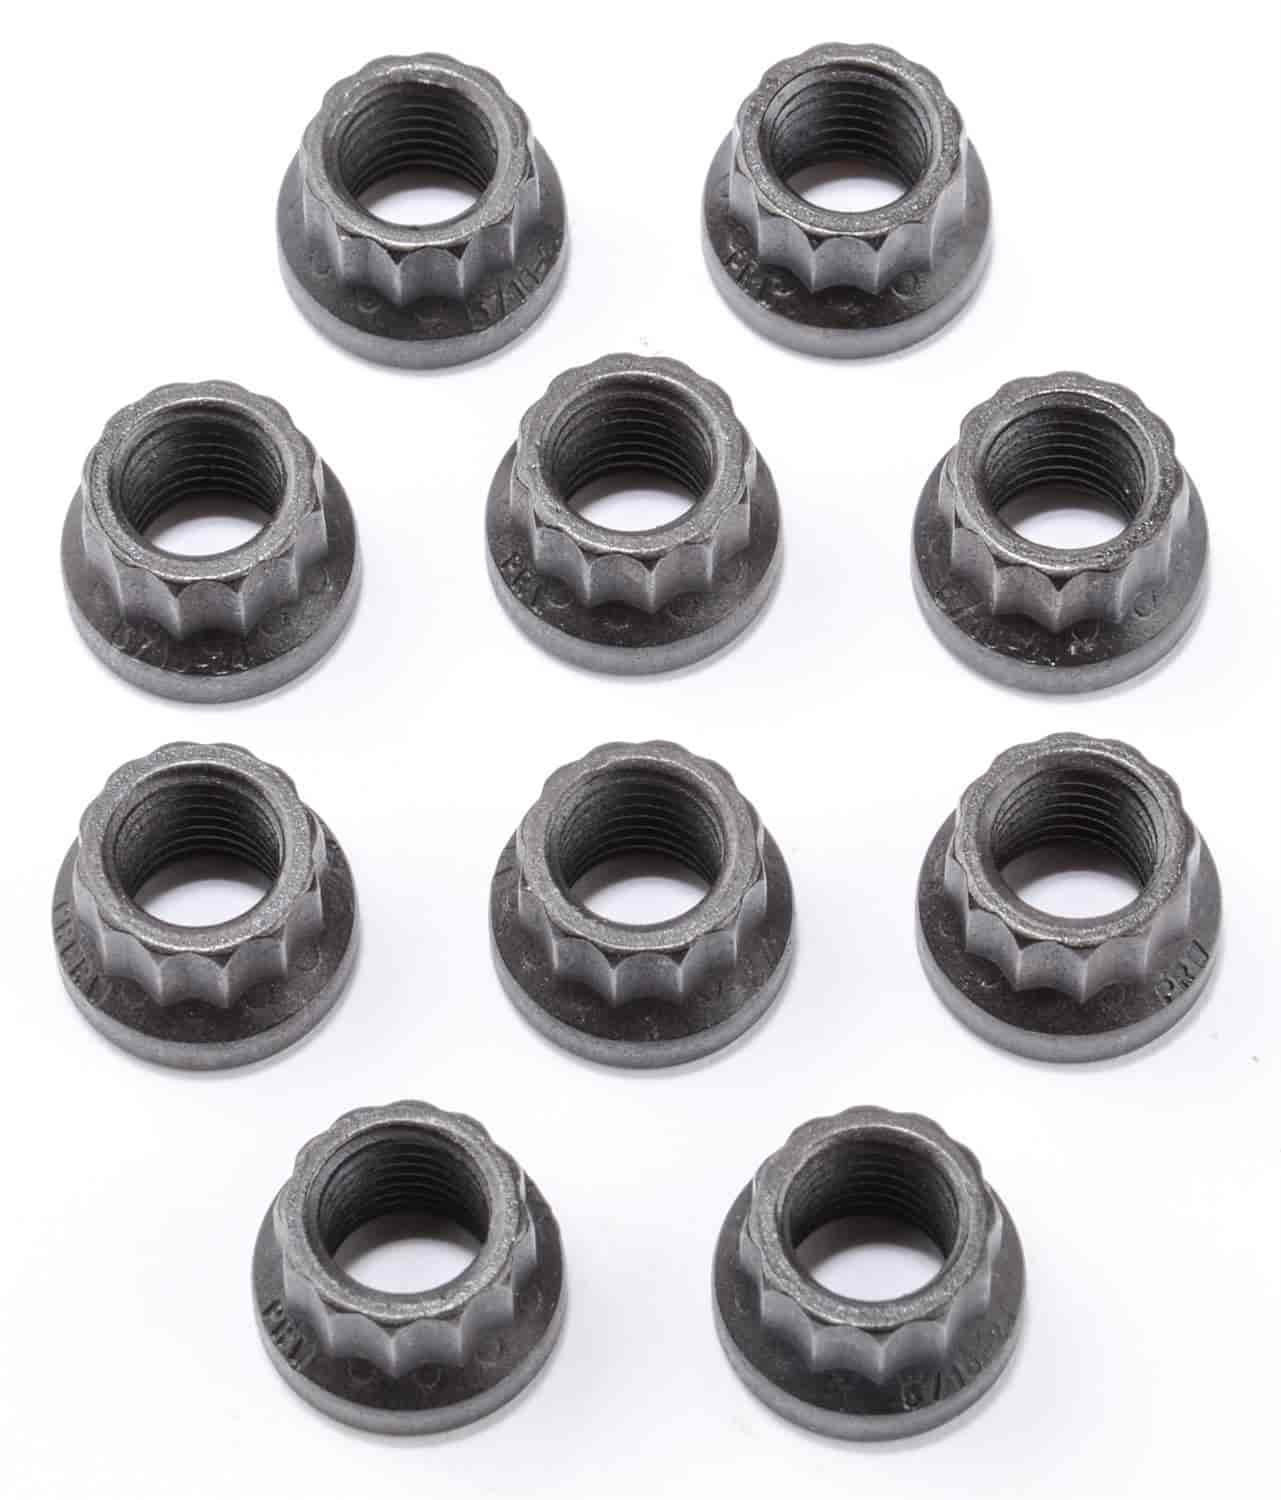 12-Point Flange Nuts 5/16"-24